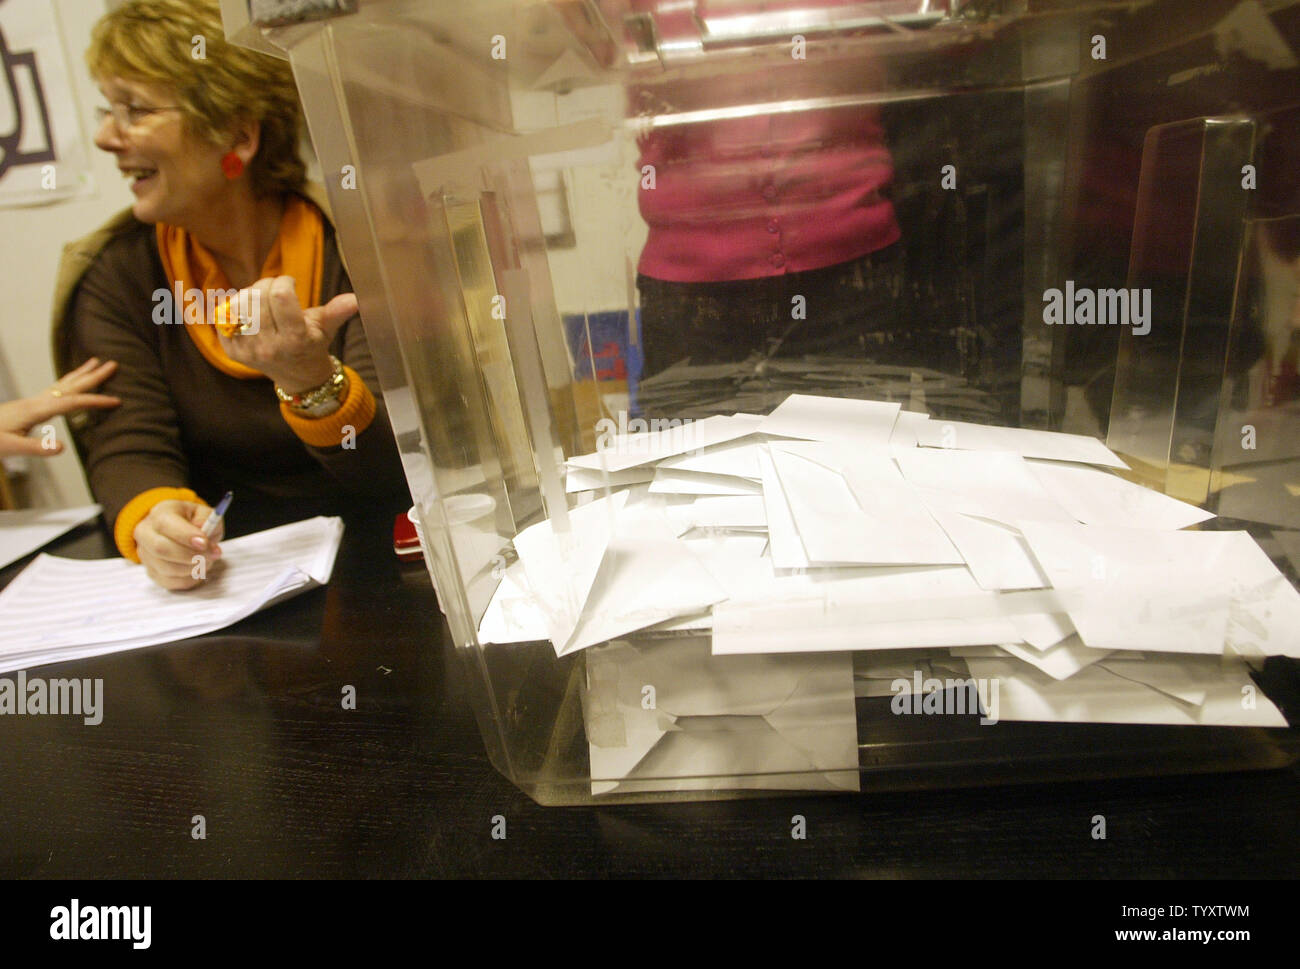 A worker of the French Socialist Party points to a box filed with ballots during the party's primary for the next French presidential election in Paris, November 16, 2006. Three candidates, Segolene Royal, Dominique Strauss-Khan and Laurent Fabius, are vying to lead the Socialist Party into next year's French presidential election.(UPI Photo/Eco Clement) Stock Photo